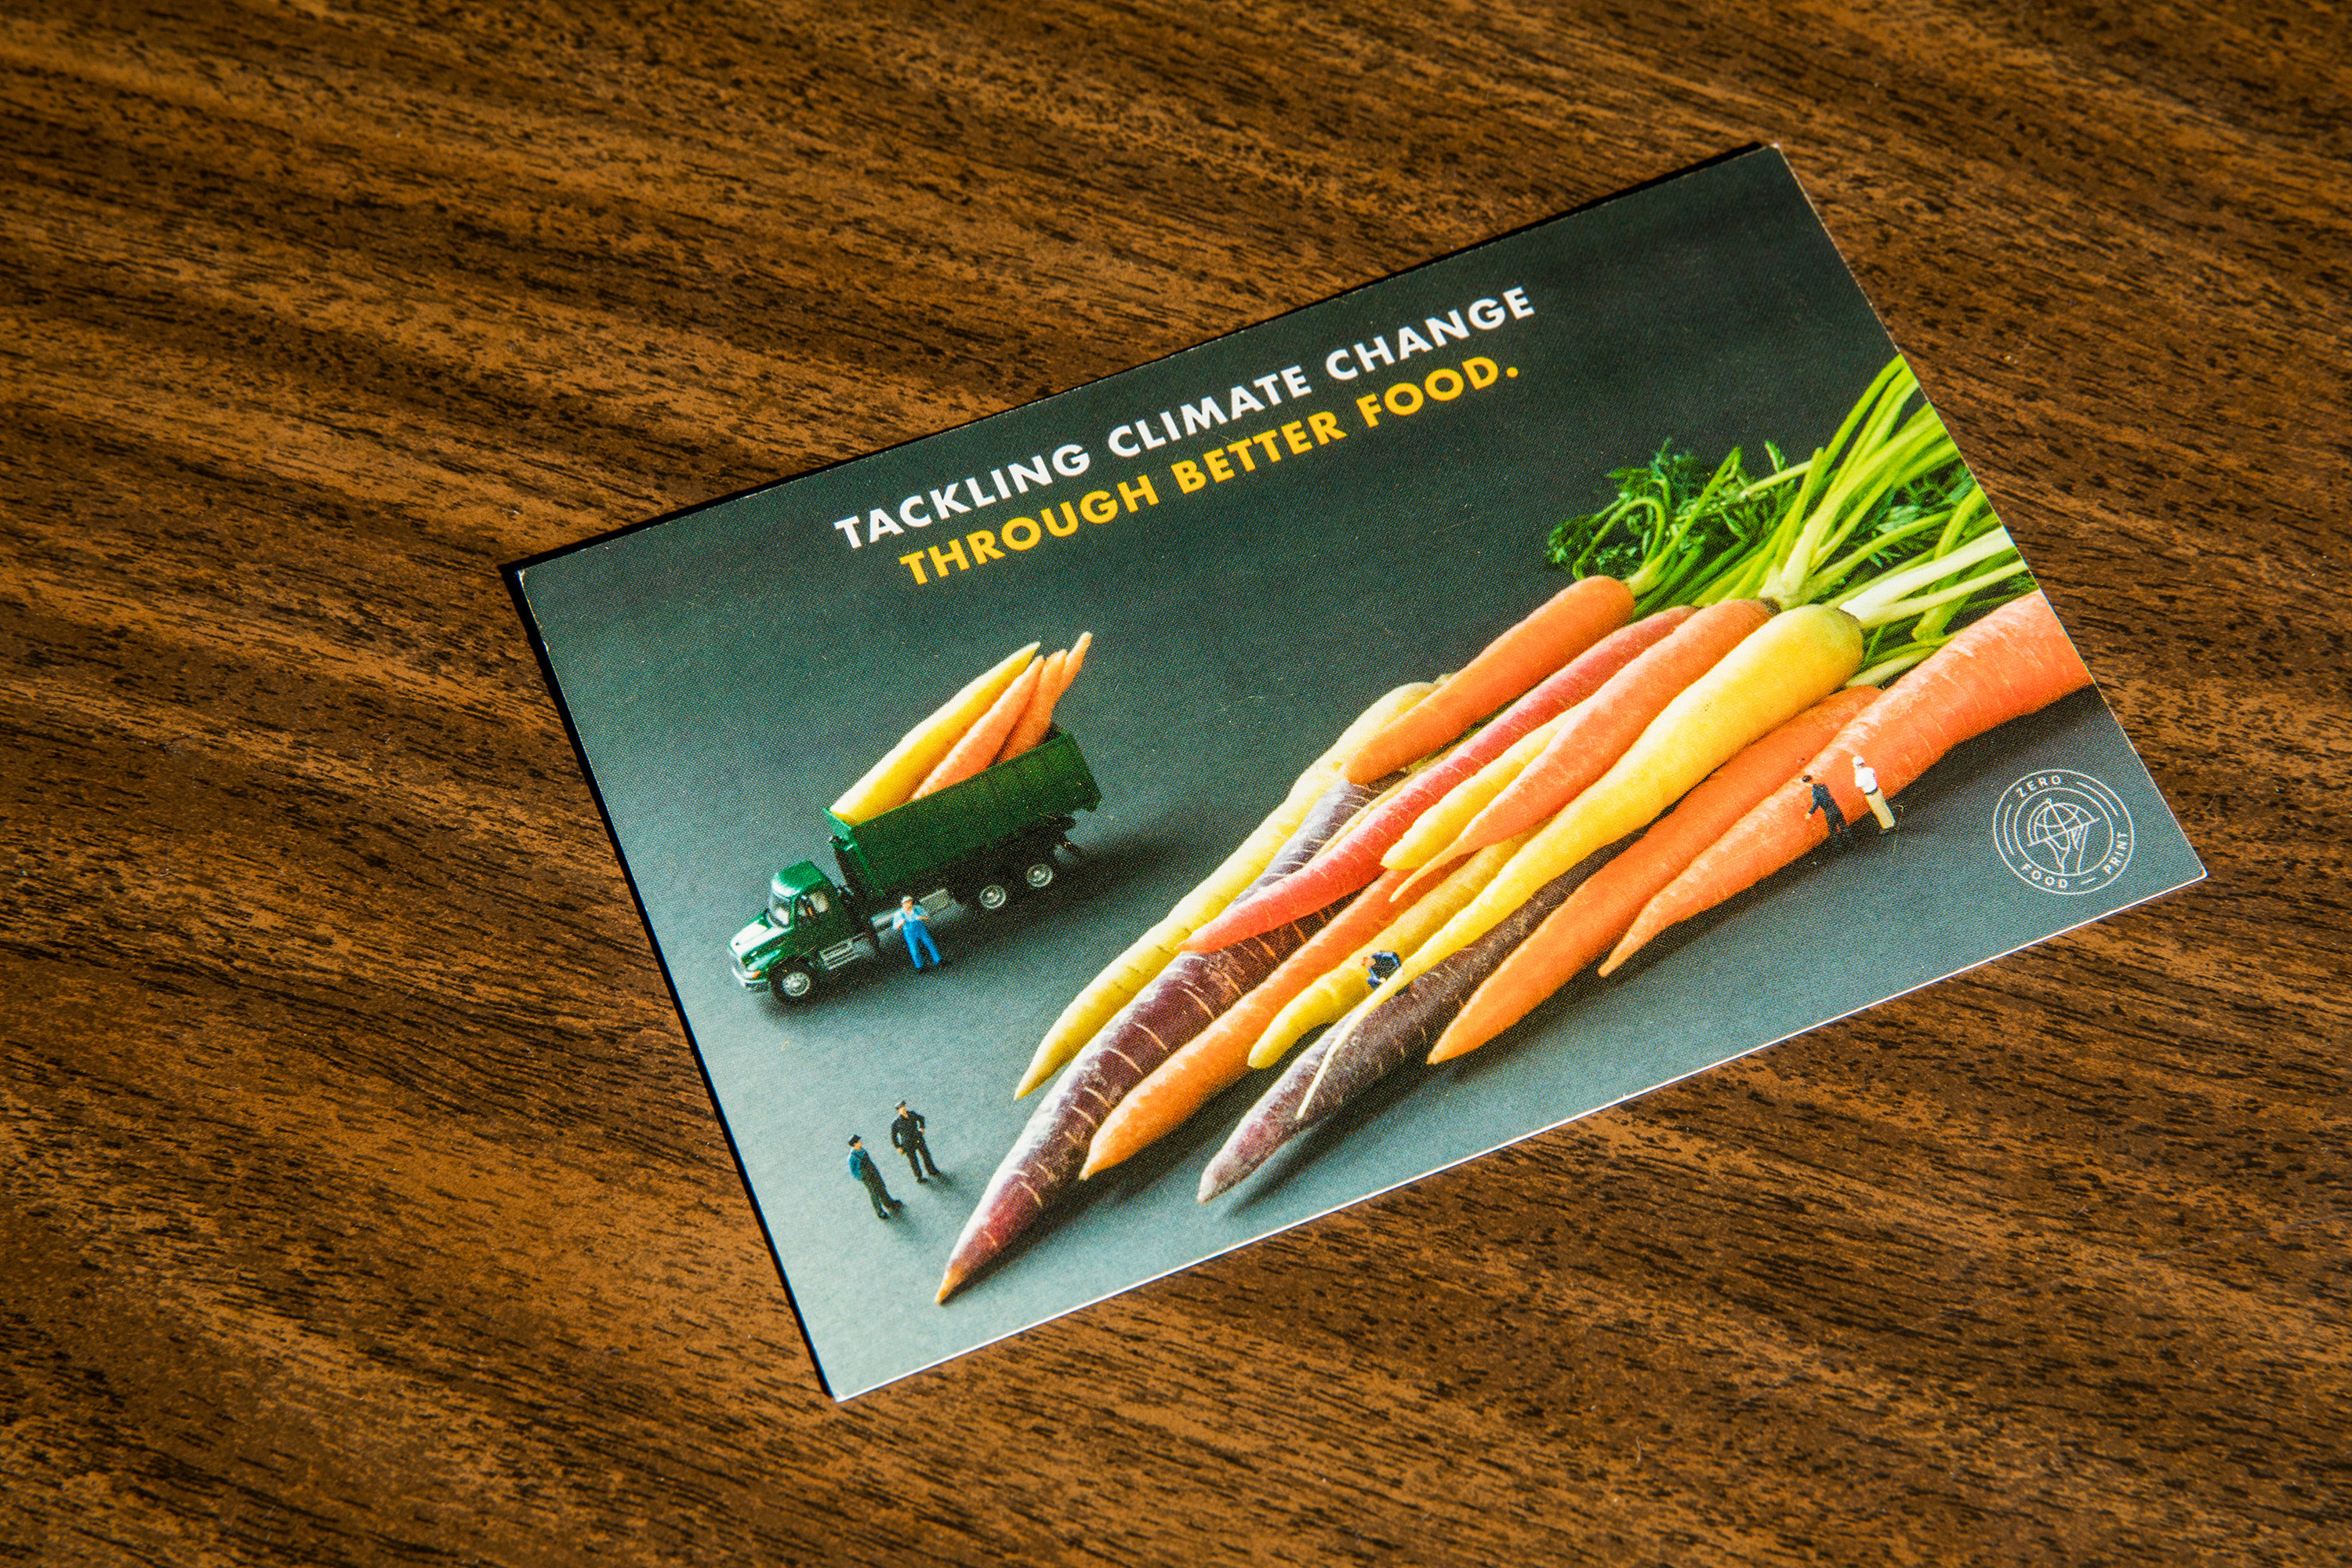 Photograph of a promo card for Zero carbon food